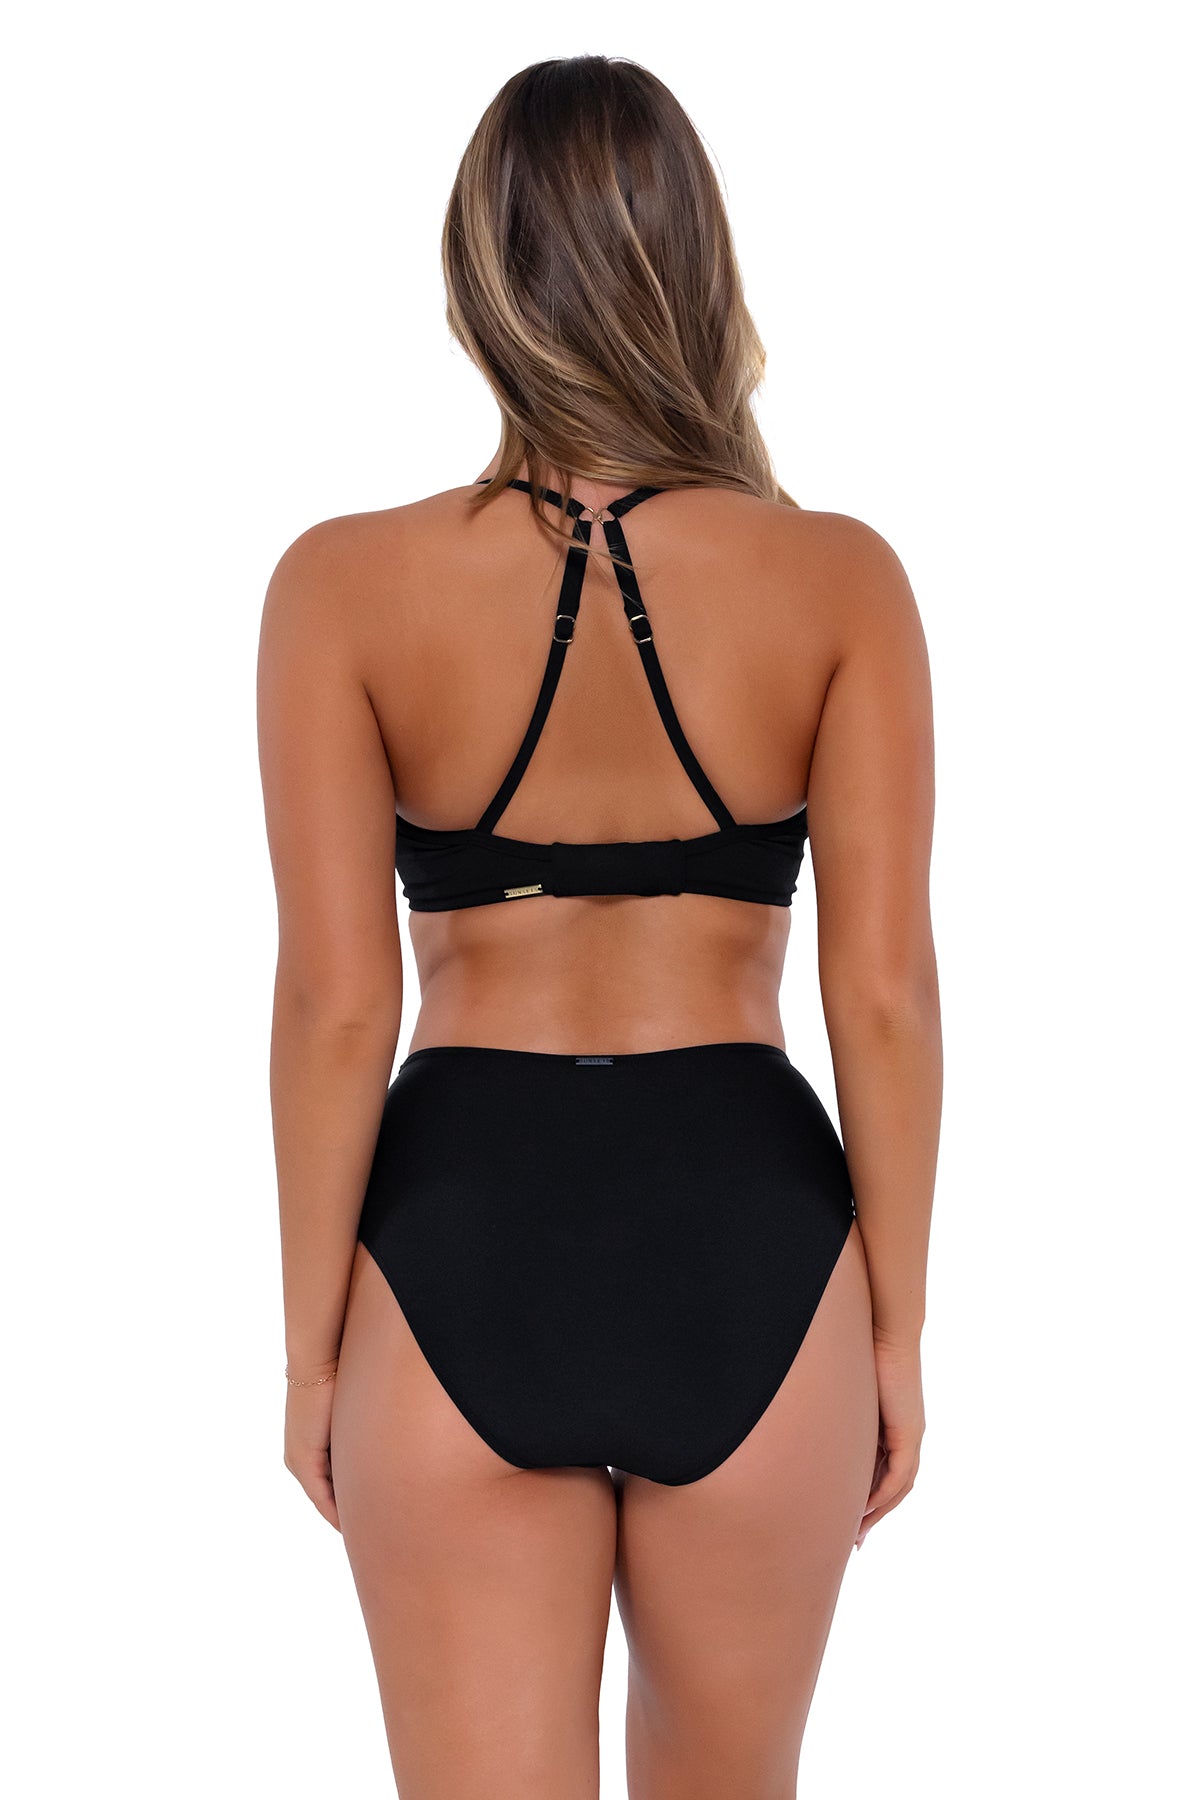 Back pose #1 of Taylor wearing Sunsets Black High Road Bottom with matching Crossroads Underwire bikini top showing crossback straps